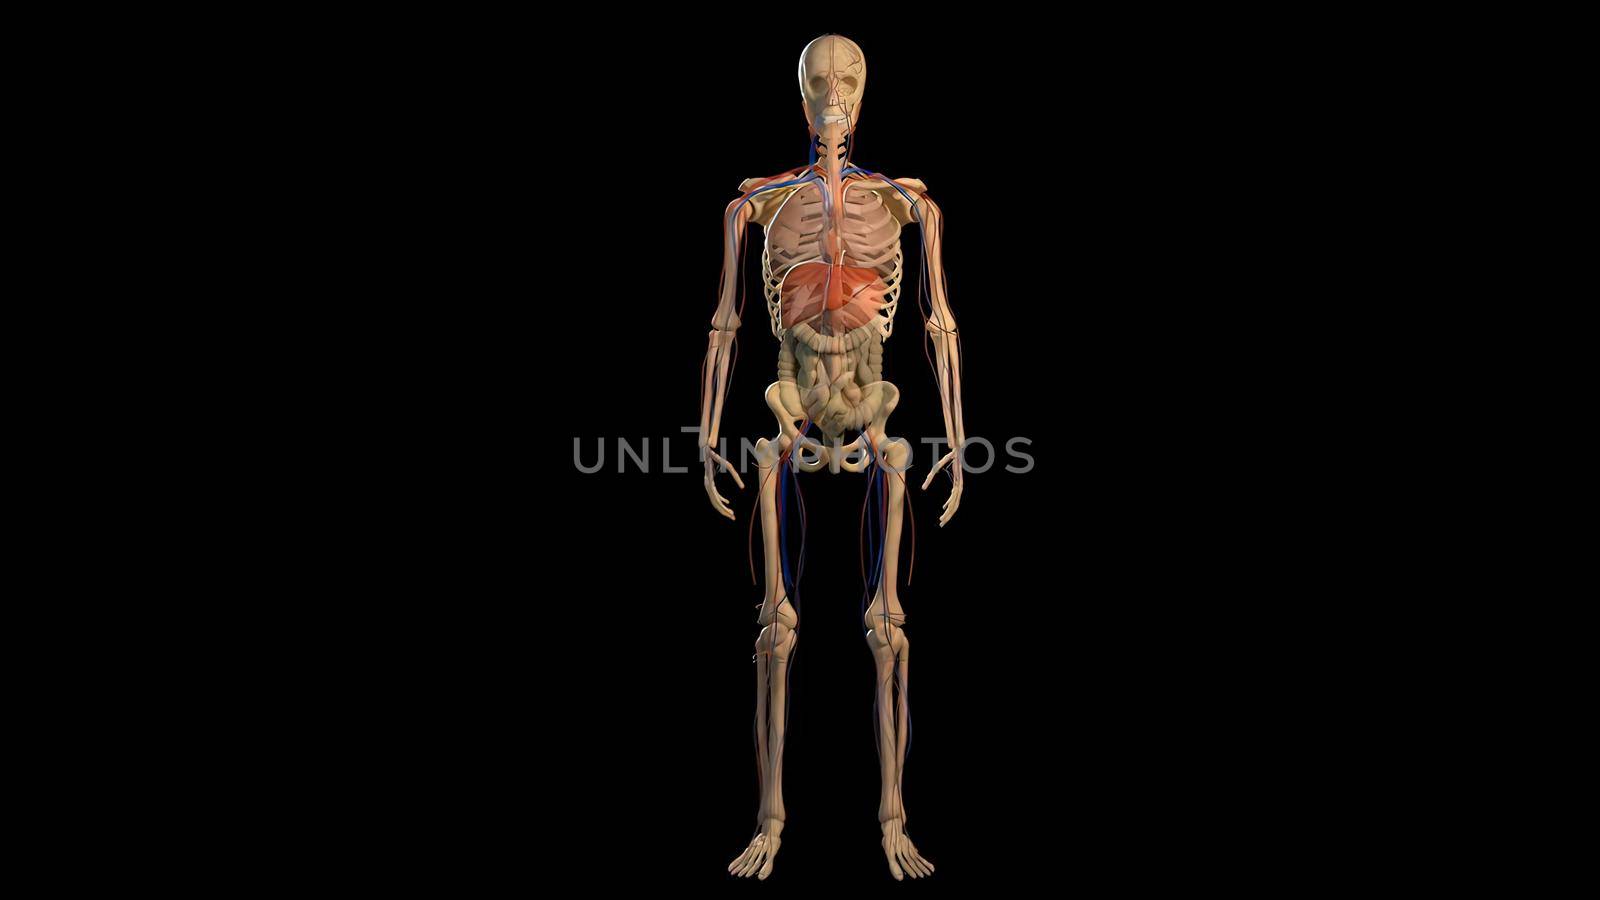 3D Animated of internal organs, nerve, bone, muscle systems created on black background, model 3d illustration